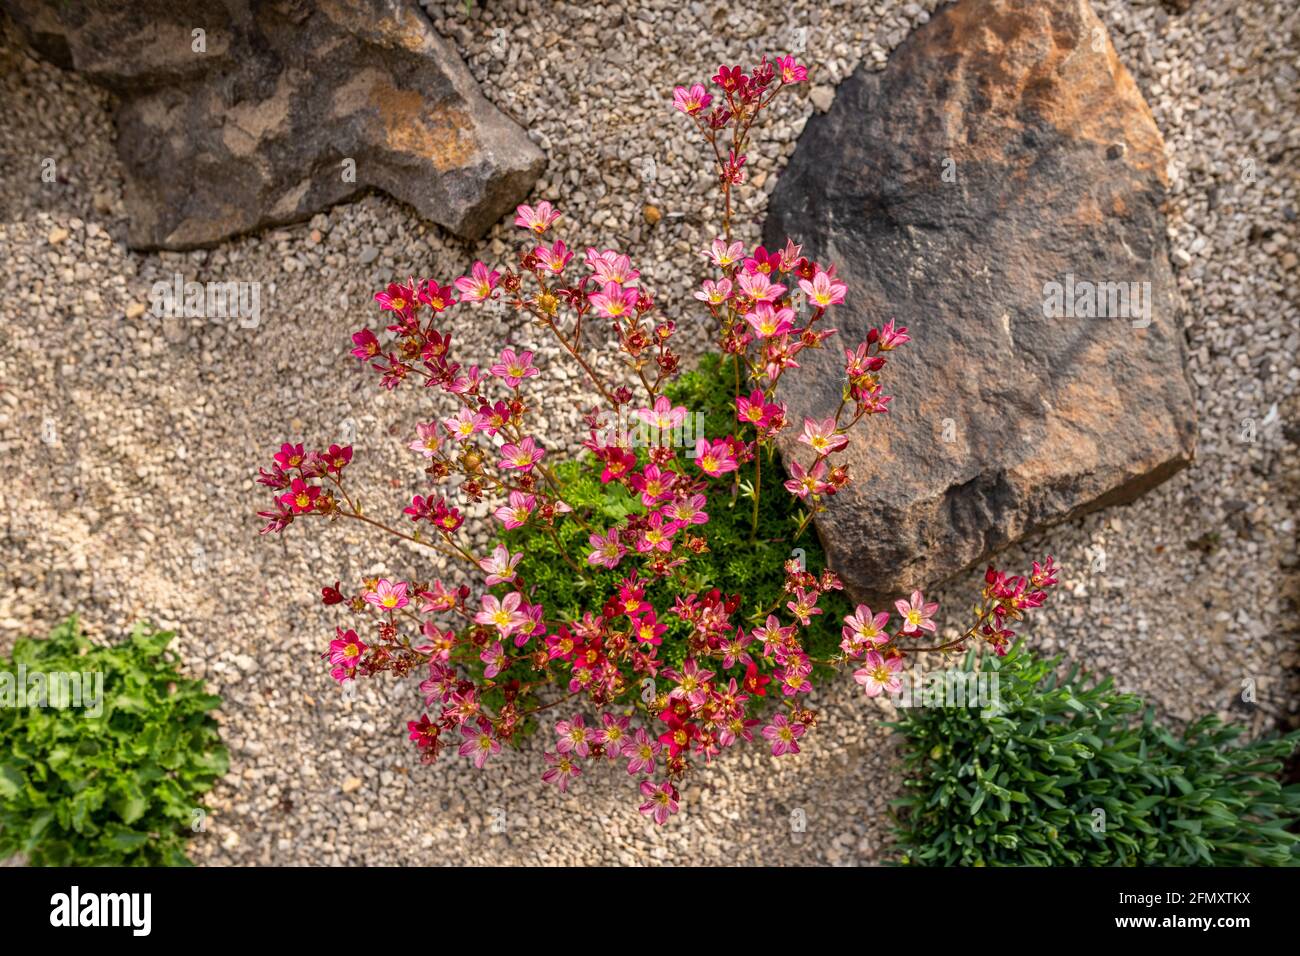 Saxifraga arendsii. Blooming saxifraga in rock garden, top view. Rockery with small pretty pink flowers, nature background. Stock Photo